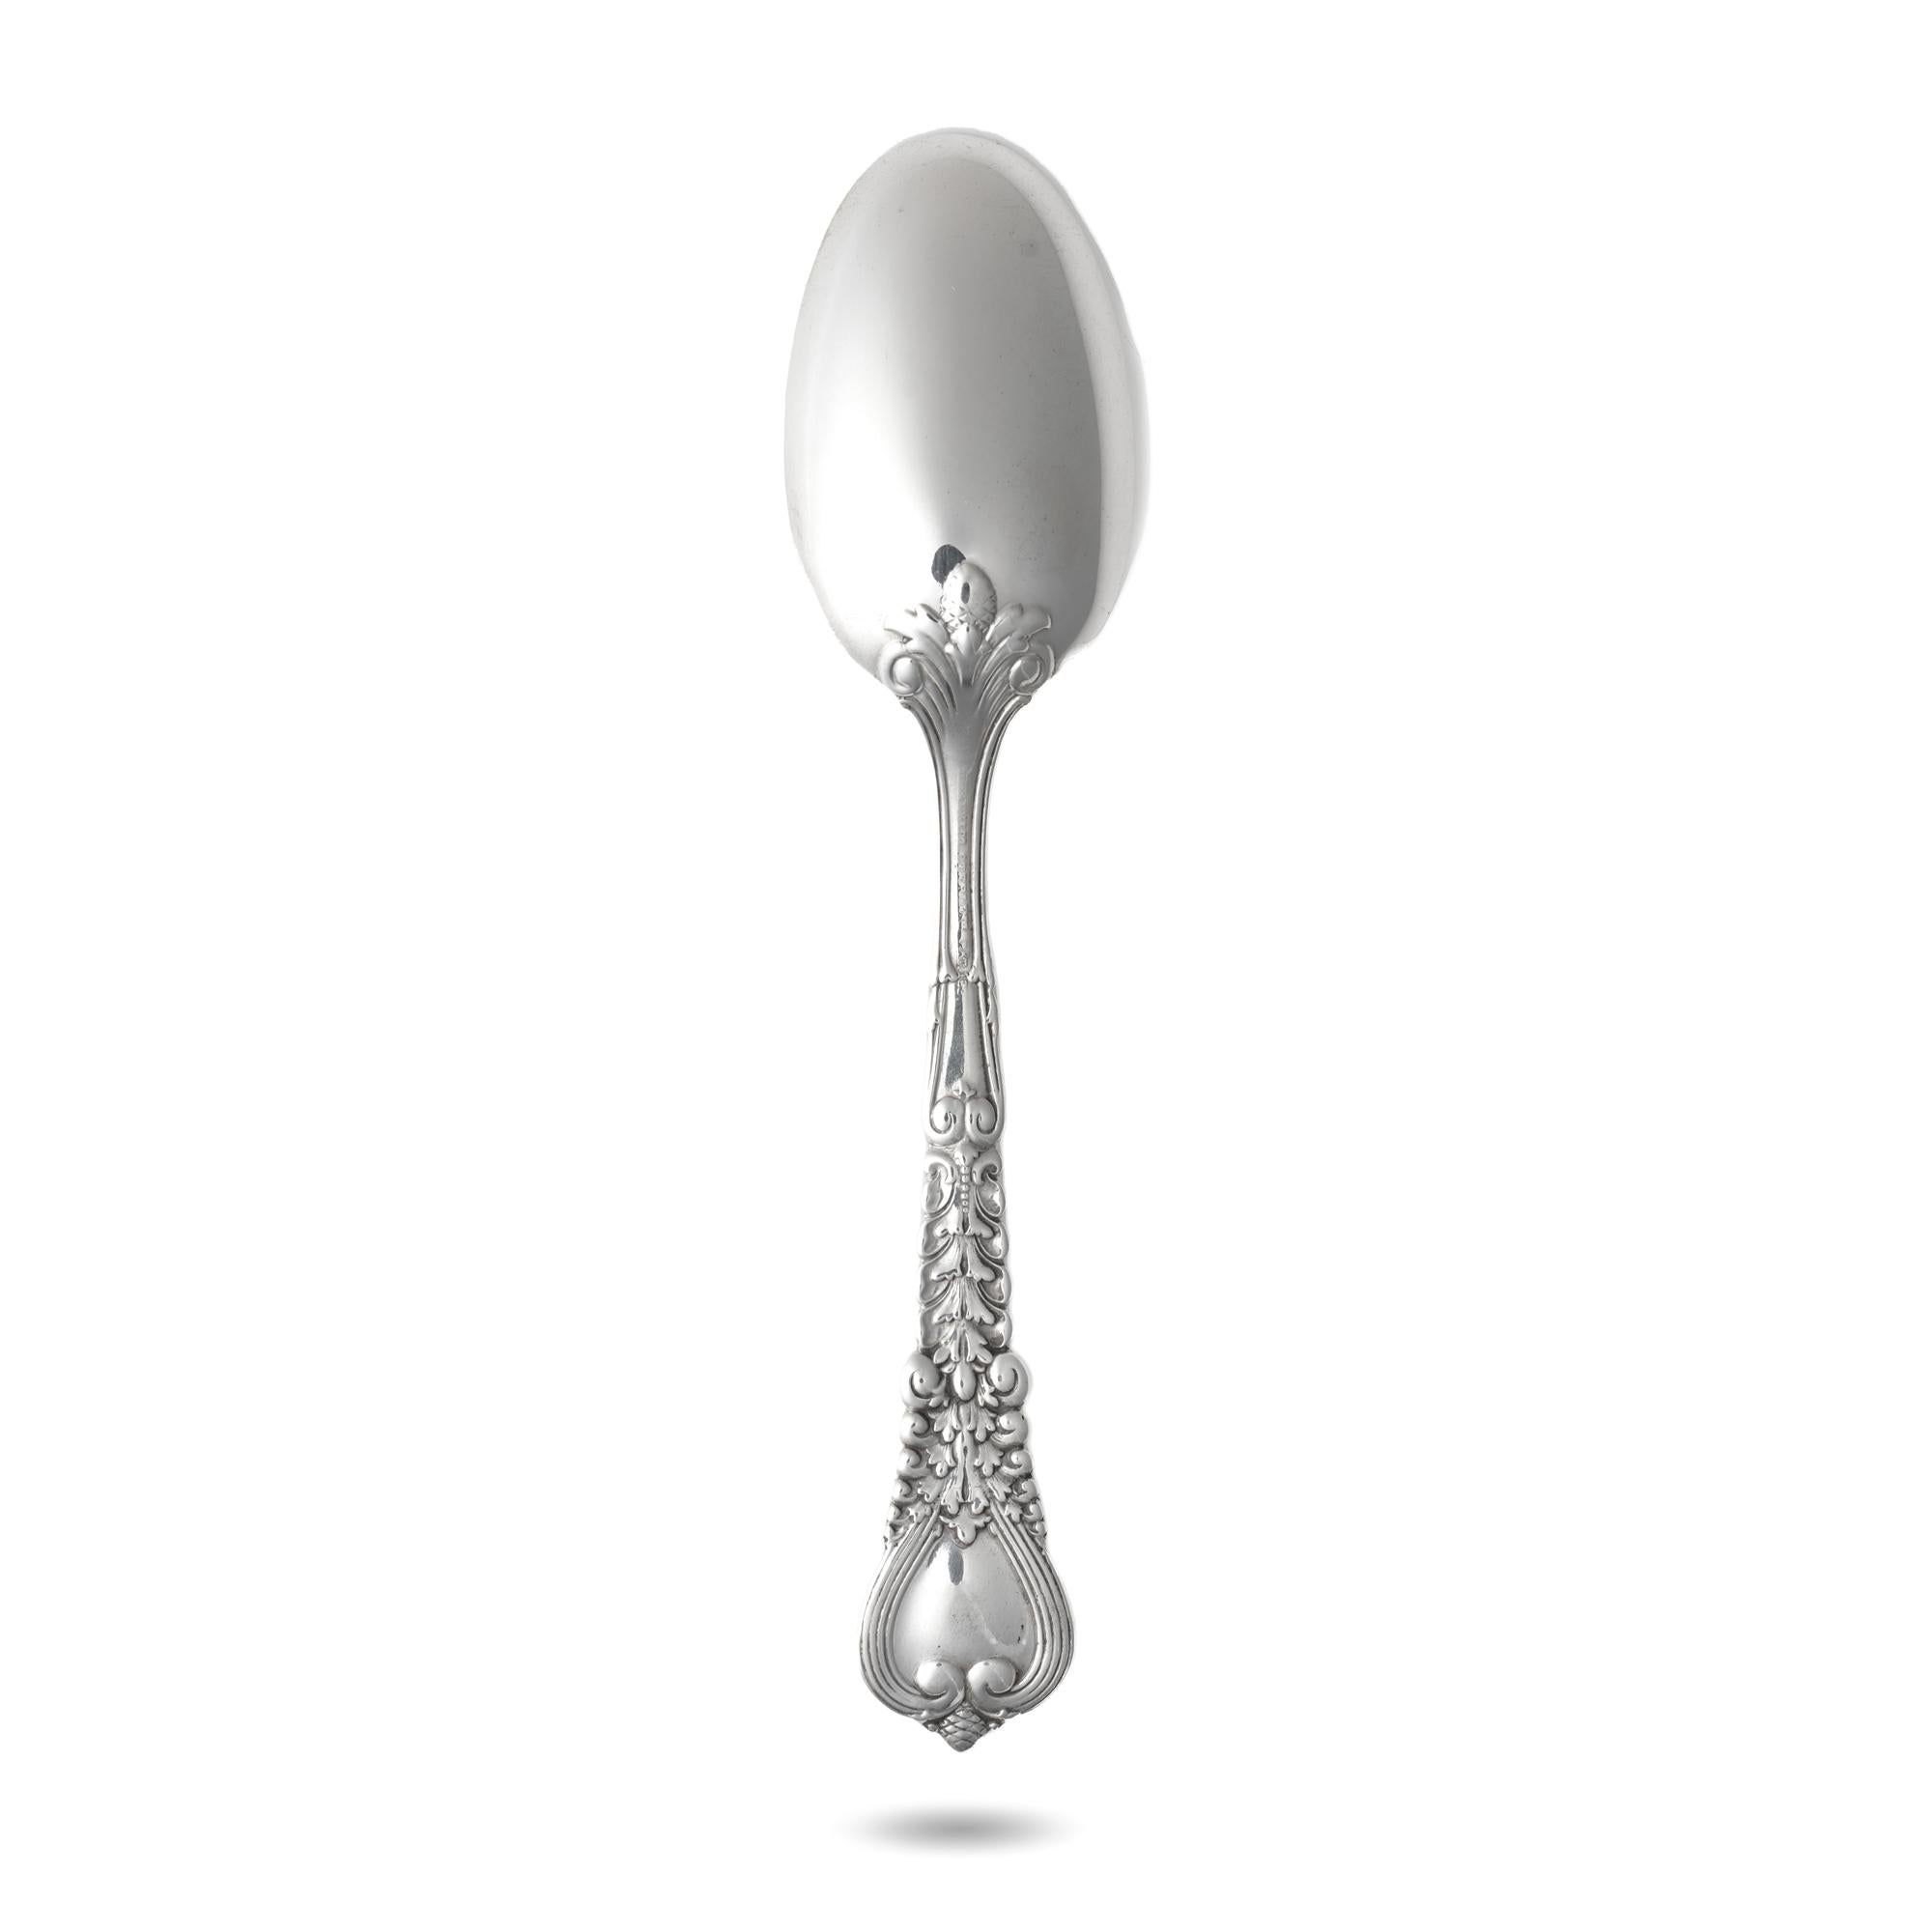 Antique Tiffany & Co. Sterling Silver Florentine Pattern Teaspoon For Sale 1